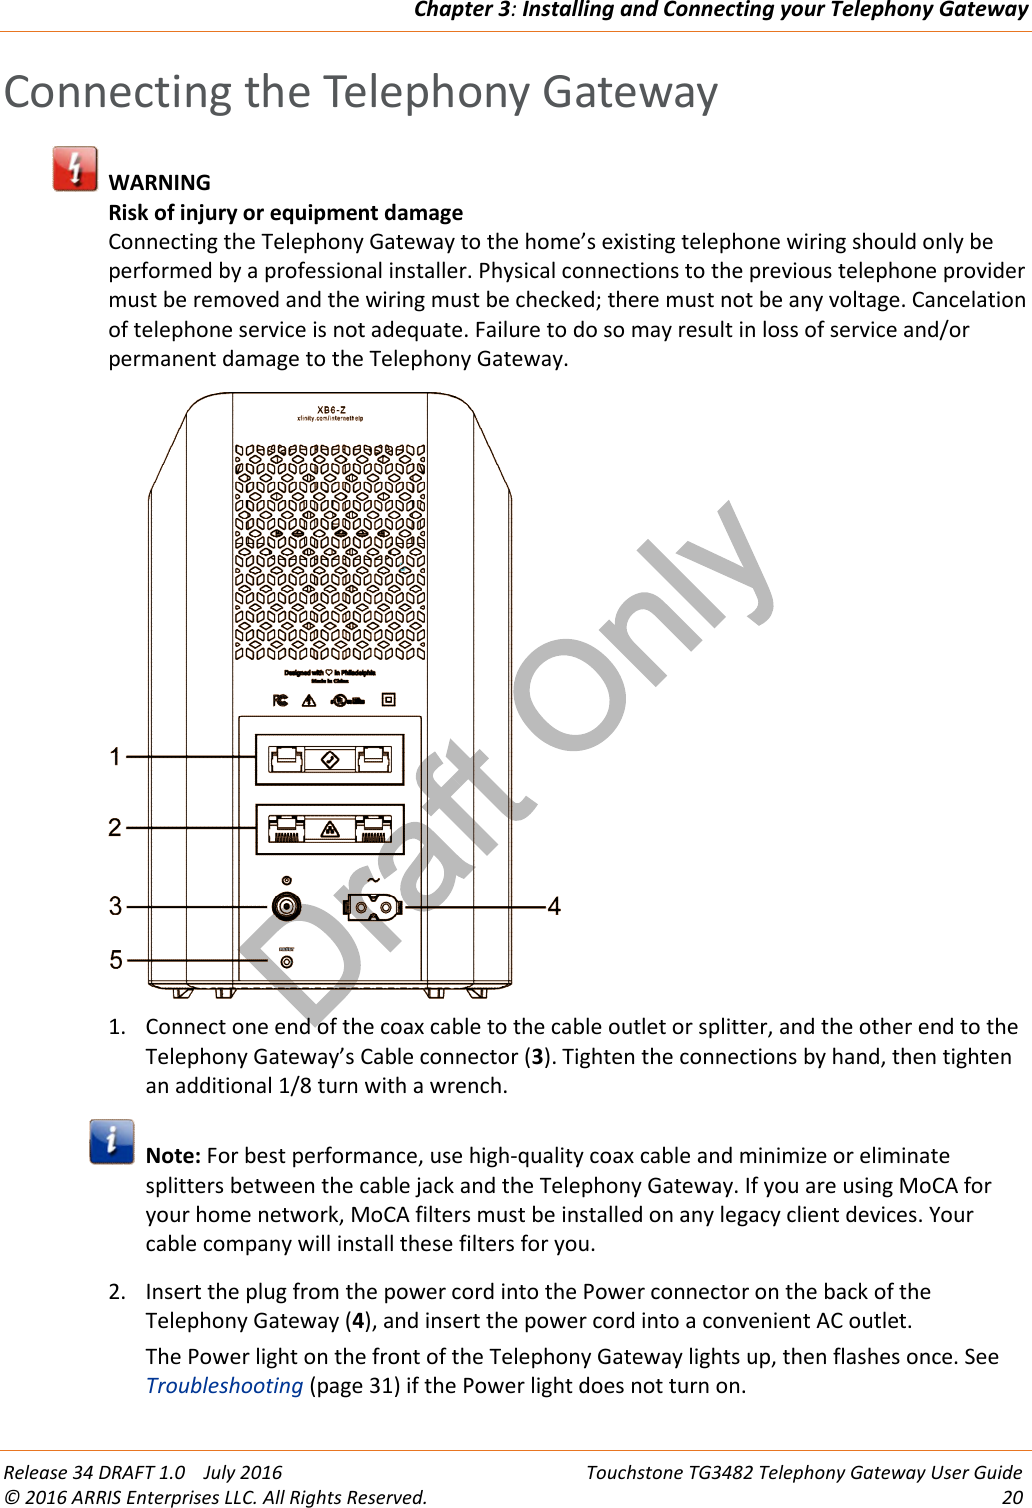 Draft OnlyChapter 3:Installing and Connecting your Telephony GatewayRelease 34 DRAFT 1.0 July 2016 Touchstone TG3482 Telephony Gateway User Guide© 2016 ARRIS Enterprises LLC. All Rights Reserved. 20Connecting the Telephony GatewayWARNINGRisk of injury or equipment damageConnecting the Telephony Gateway to the home’s existing telephone wiring should only beperformed by a professional installer. Physical connections to the previous telephone providermust be removed and the wiring must be checked; there must not be any voltage. Cancelationof telephone service is not adequate. Failure to do so may result in loss of service and/orpermanent damage to the Telephony Gateway.1. Connect one end of the coax cable to the cable outlet or splitter, and the other end to theTelephony Gateway’s Cable connector (3). Tighten the connections by hand, then tightenan additional 1/8 turn with a wrench.Note: For best performance, use high-quality coax cable and minimize or eliminatesplitters between the cable jack and the Telephony Gateway. If you are using MoCA foryour home network, MoCA filters must be installed on any legacy client devices. Yourcable company will install these filters for you.2. Insert the plug from the power cord into the Power connector on the back of theTelephony Gateway (4), and insert the power cord into a convenient AC outlet.The Power light on the front of the Telephony Gateway lights up, then flashes once. SeeTroubleshooting (page 31) if the Power light does not turn on.